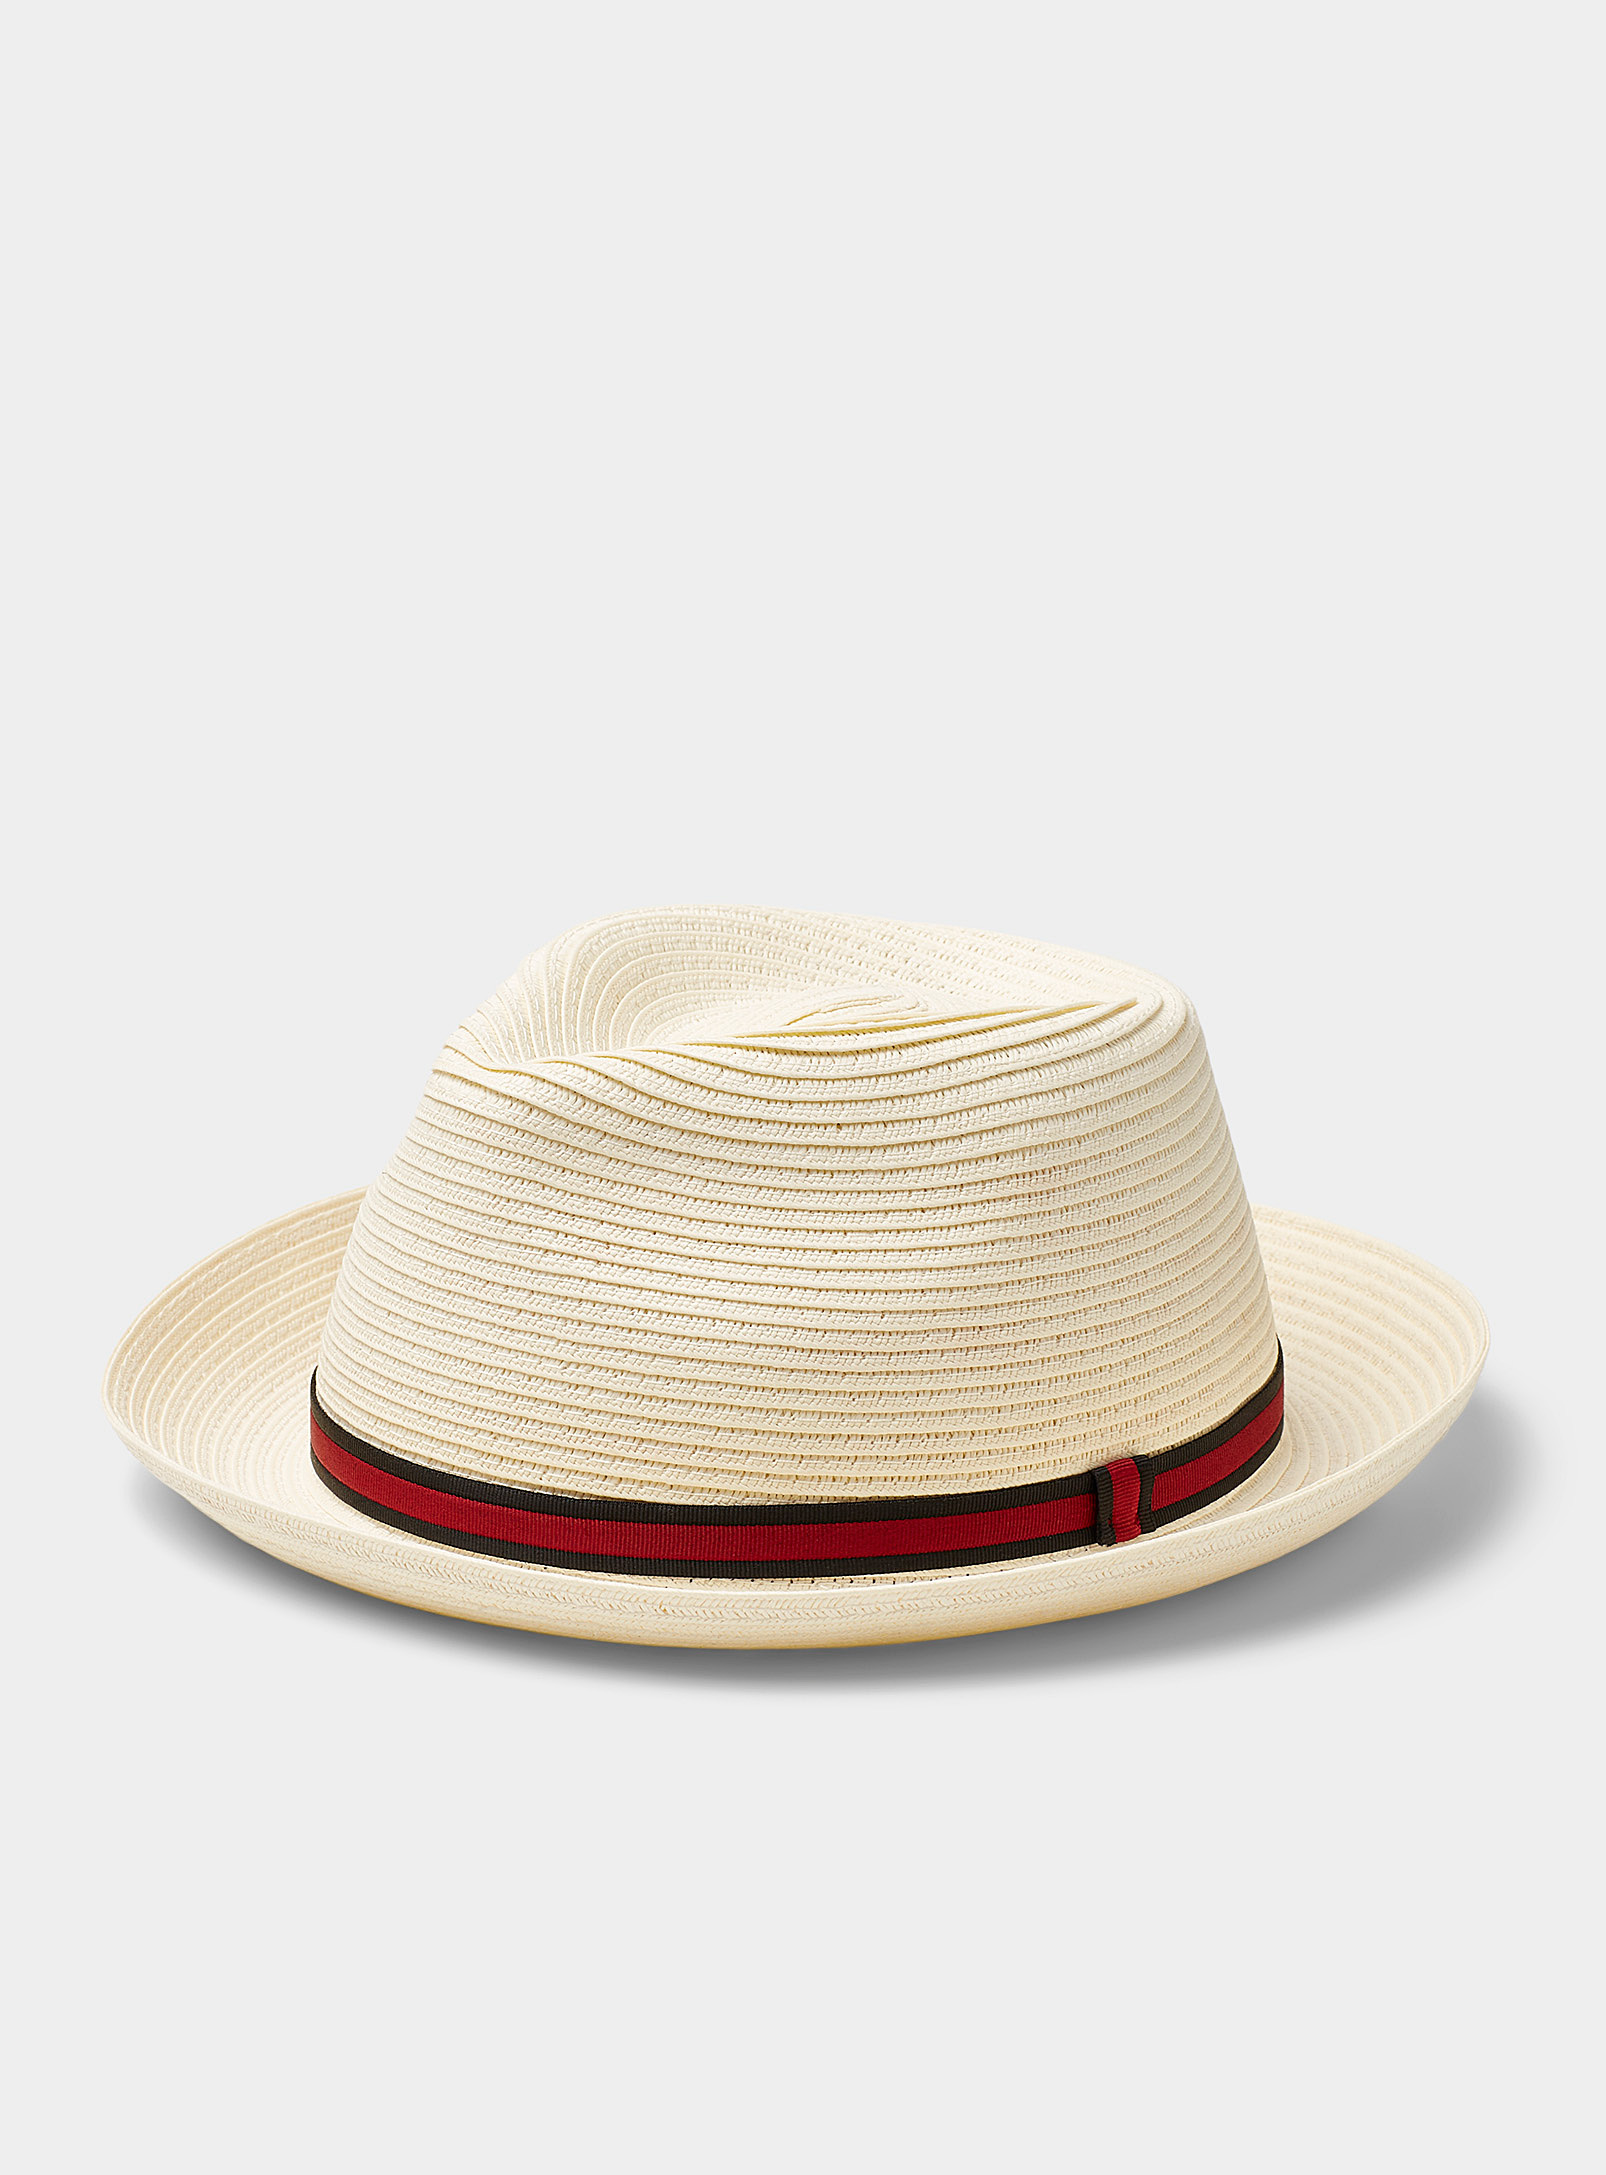 Le 31 - Men's Red-band straw Fedora Hat